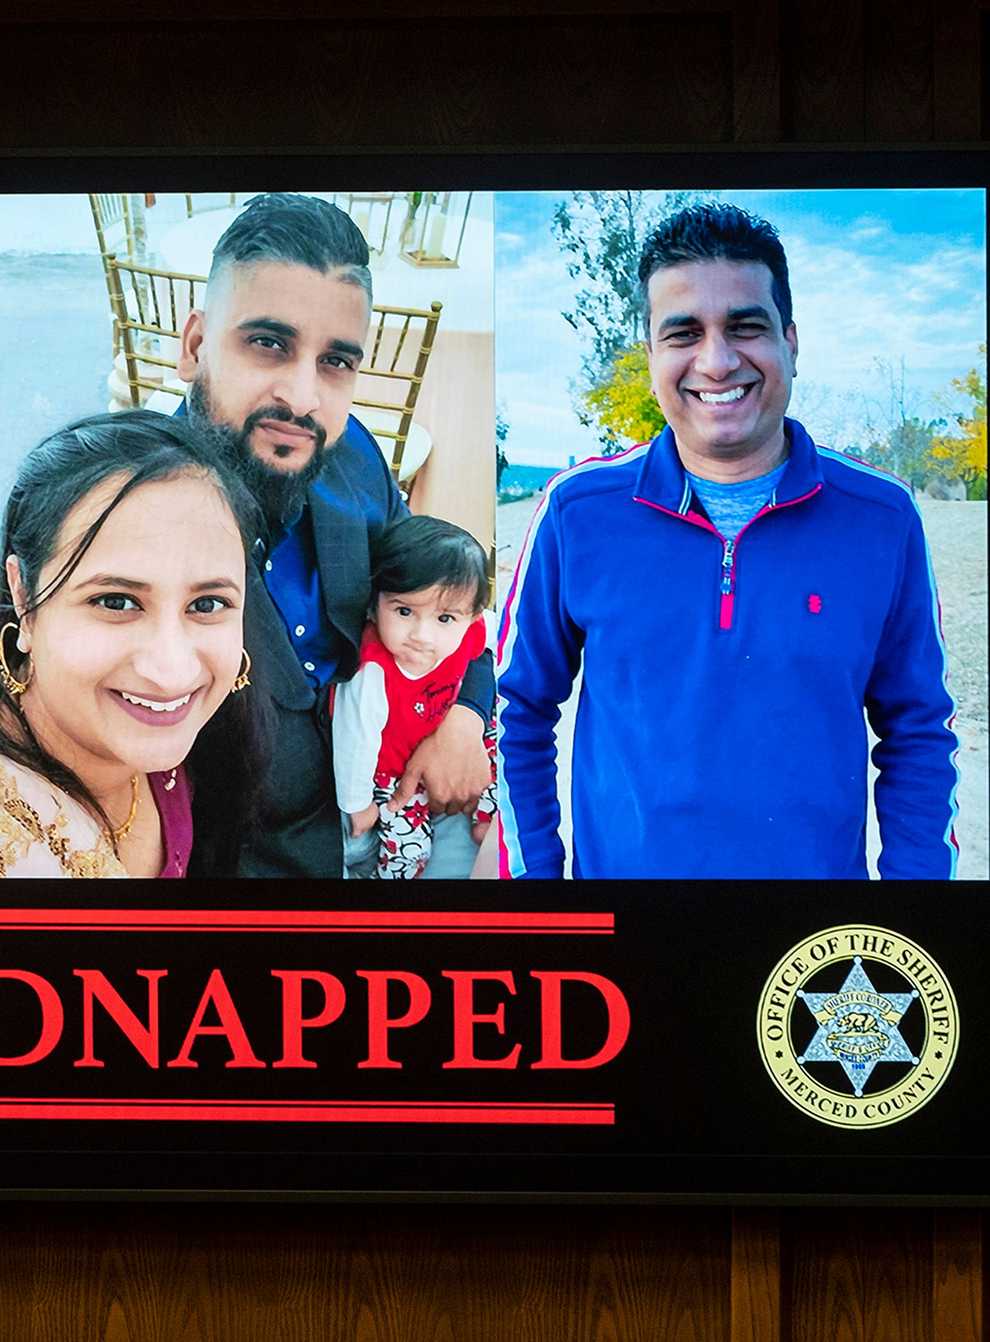 A baby girl and three other family members who were kidnapped at gunpoint have been found dead in a central California orchard (Andrew Kuhn/The Merced Sun-Star/AP)